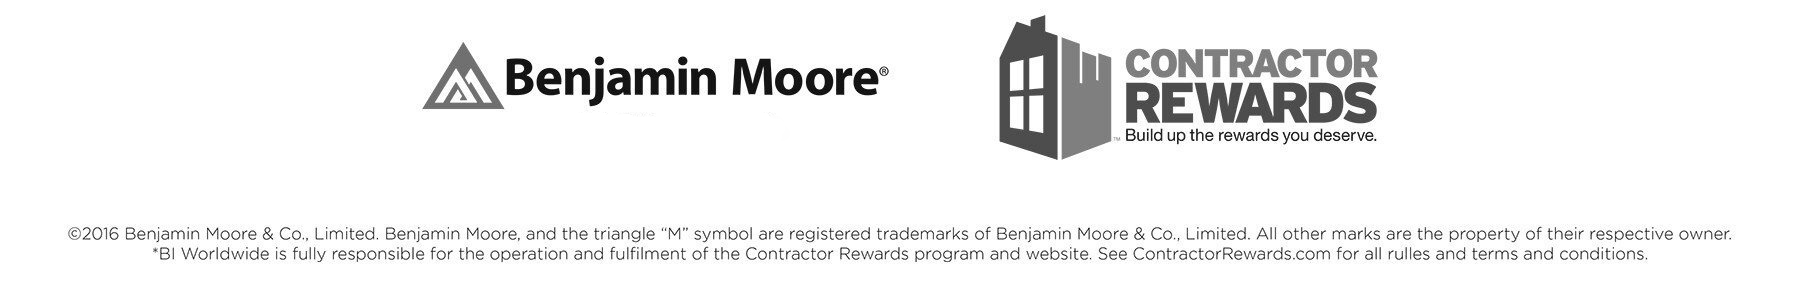 black and white graphic which contains the Benjamin Moore Paint logo and the Contractor Rewards logo side-by-side